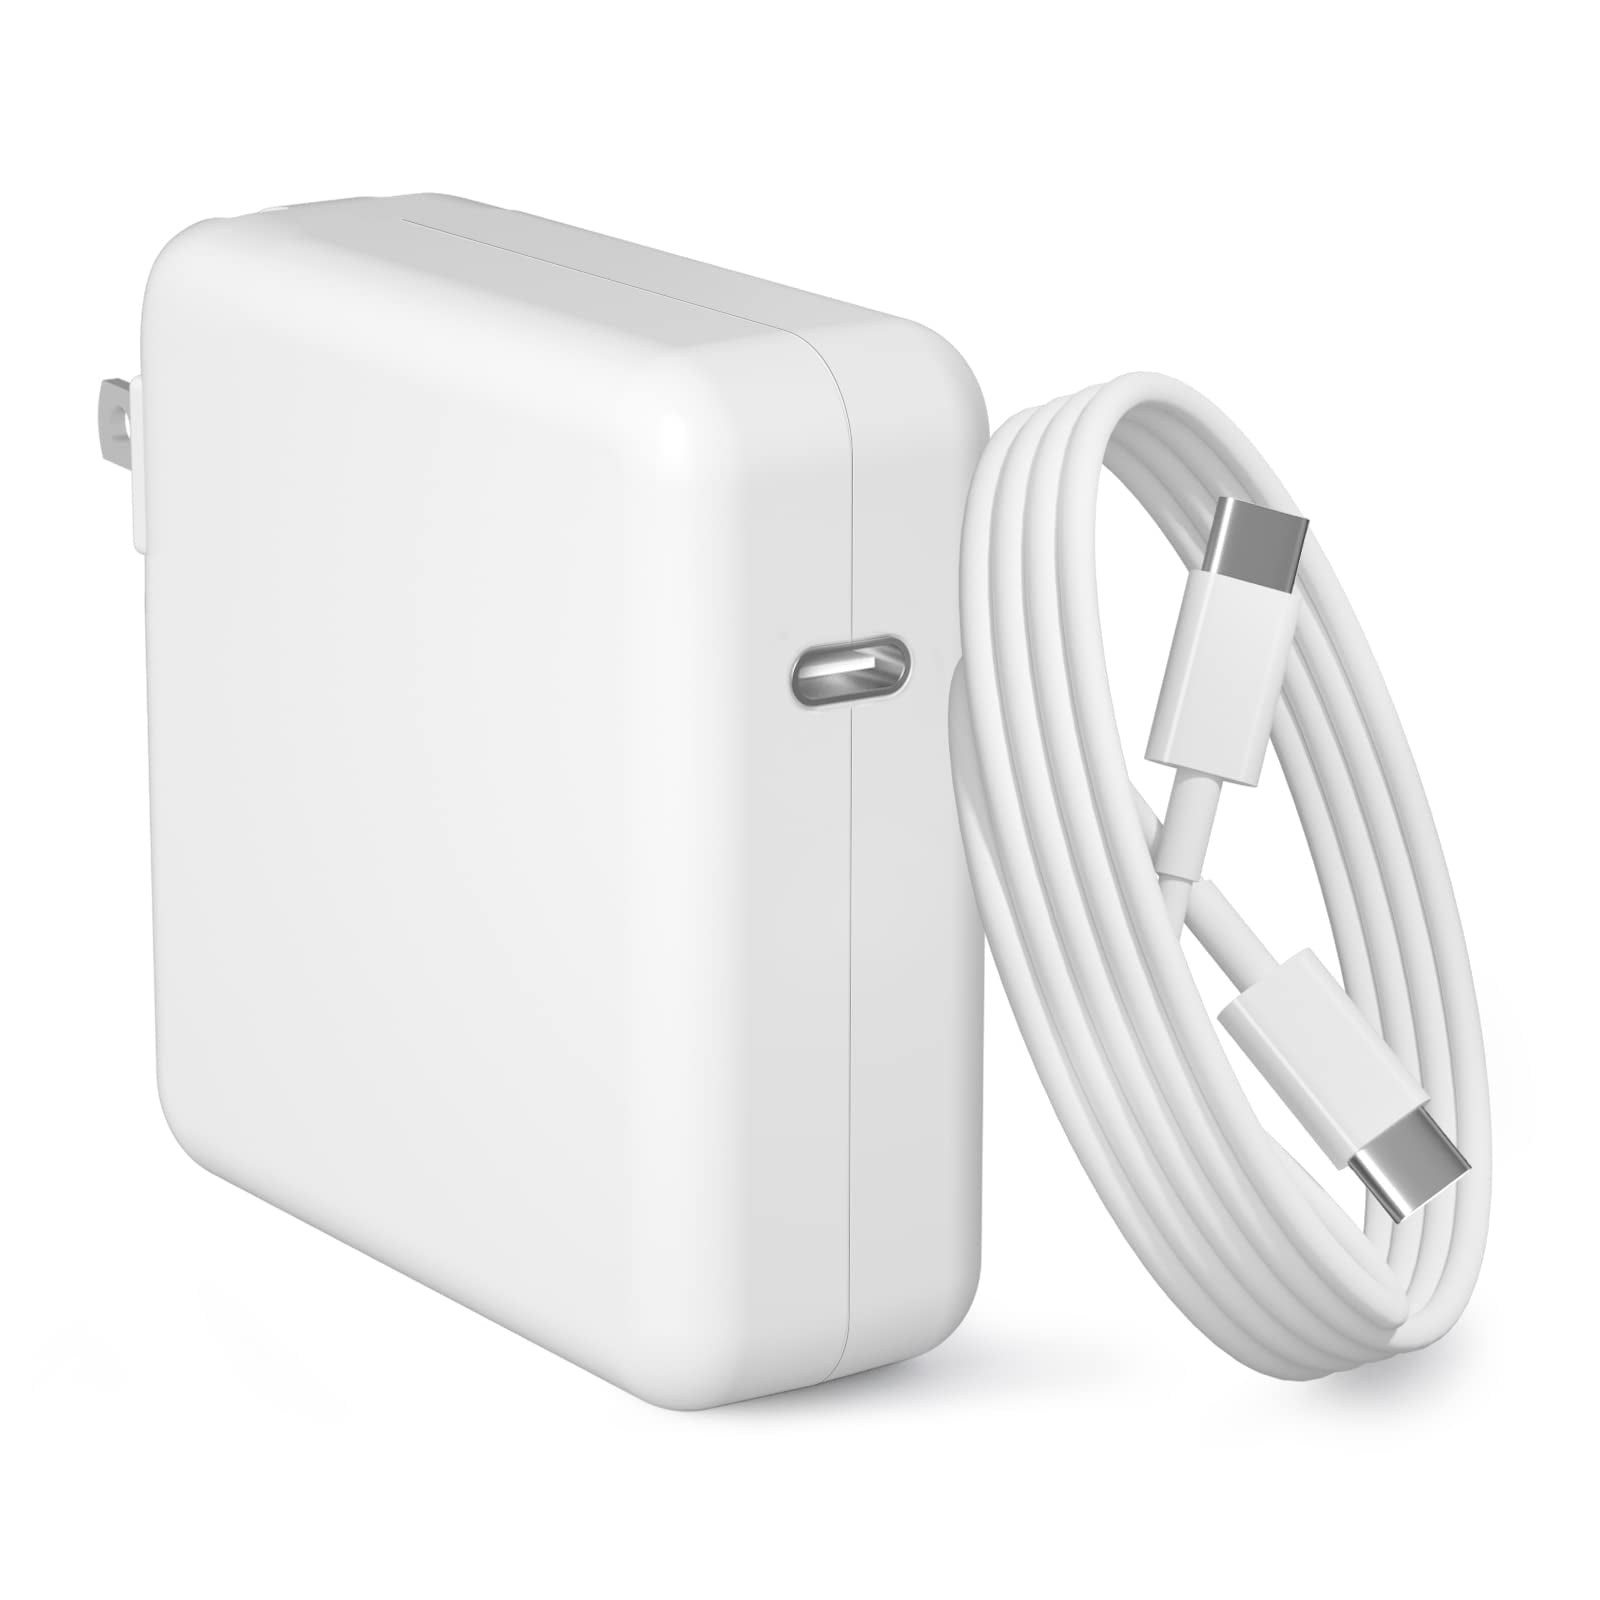 Mac Book Pro USB-C Power Adapter Compatible with MacBook Pro 16/15/13-inch,for Air,for MacBook 12-inch,for Ipad Pro,Included USB- C to USB-C Cable(2M) - Walmart.com